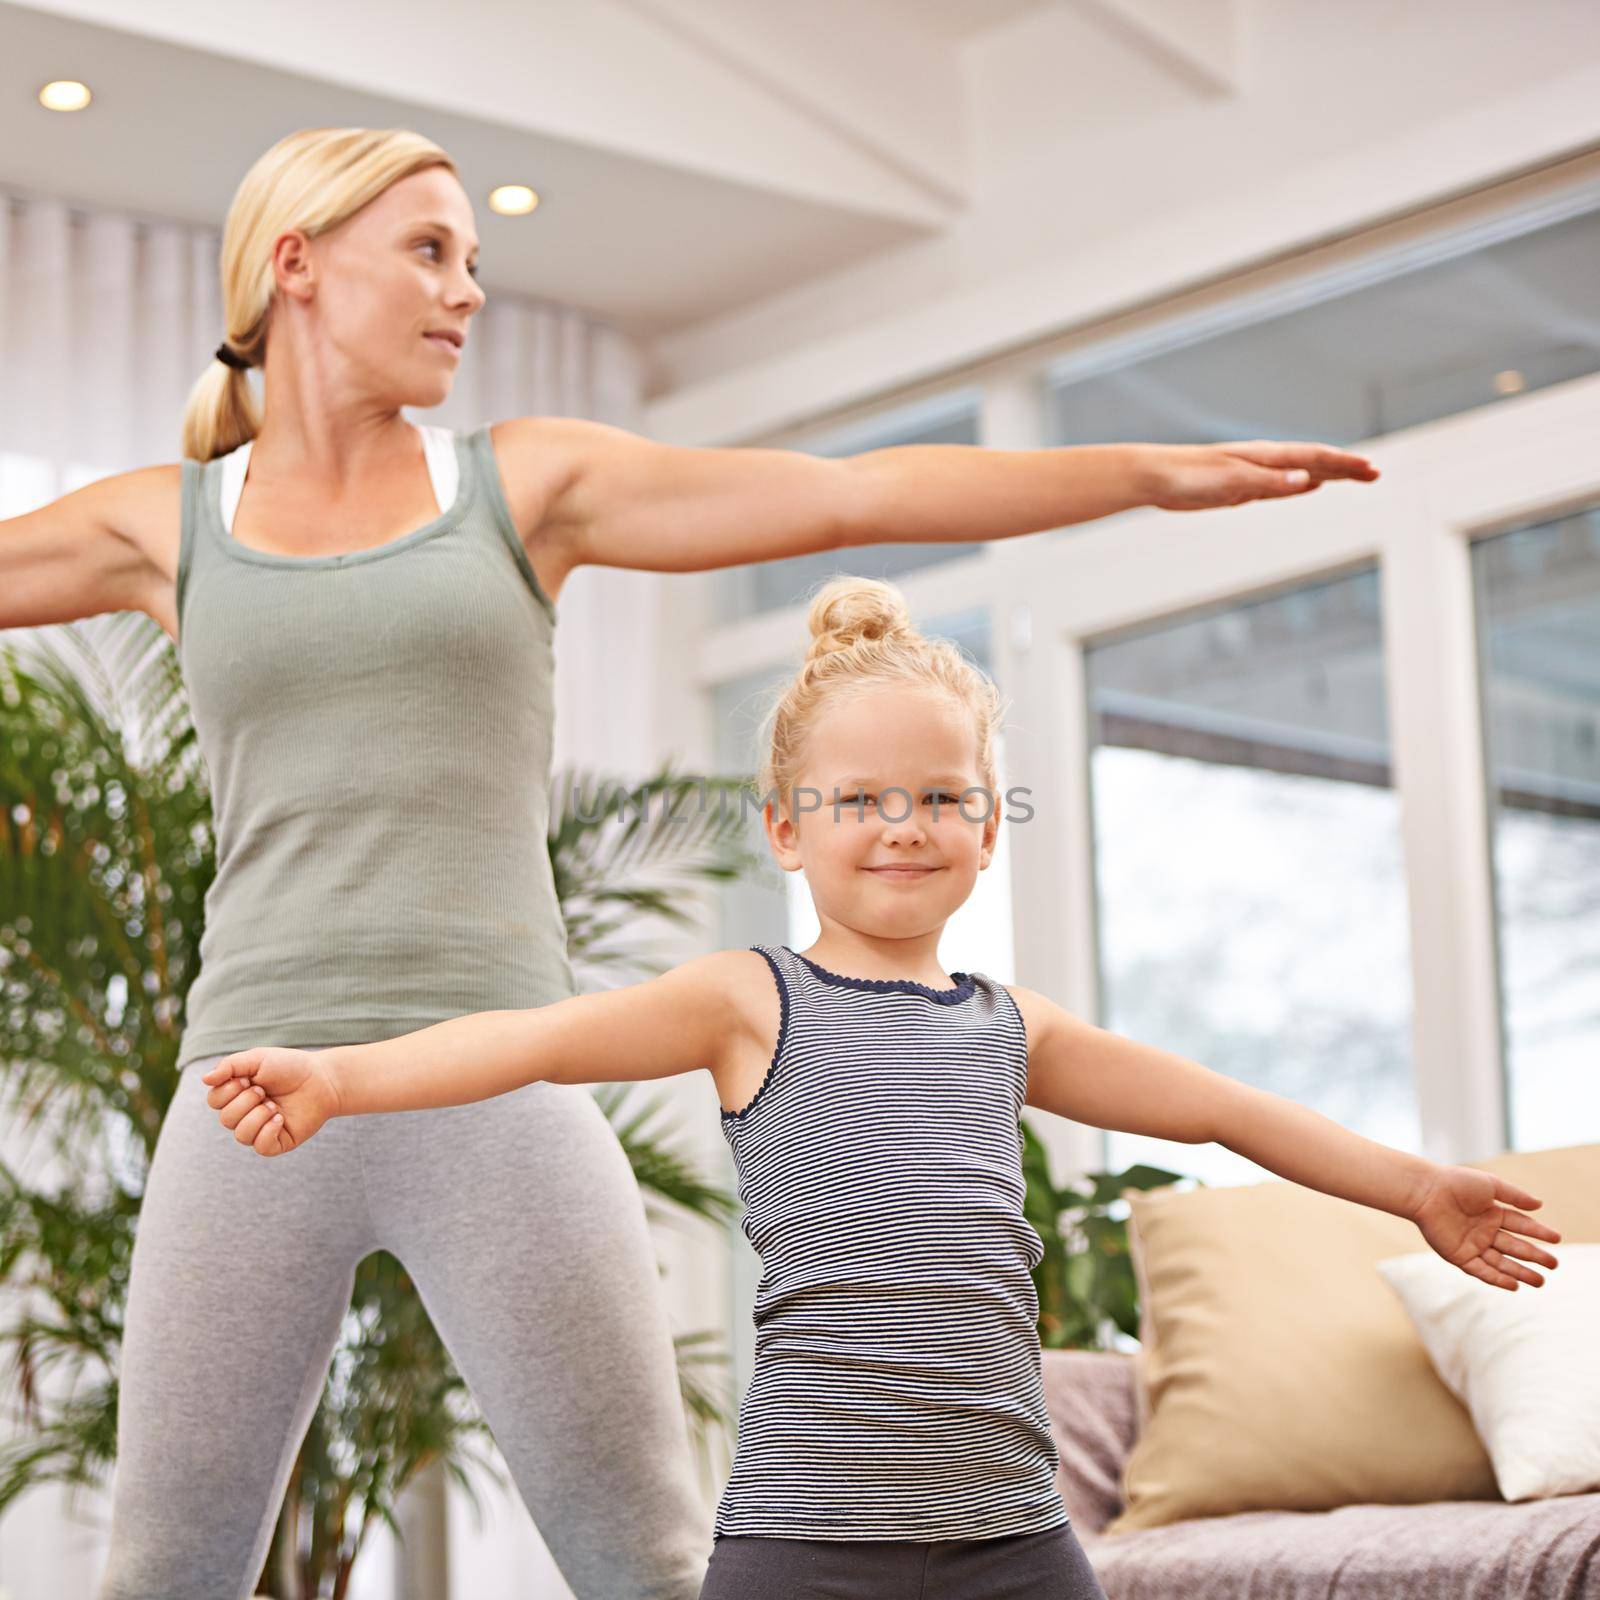 Yoga has no age restriction. Full length shot of a mother and daughter doing yoga together